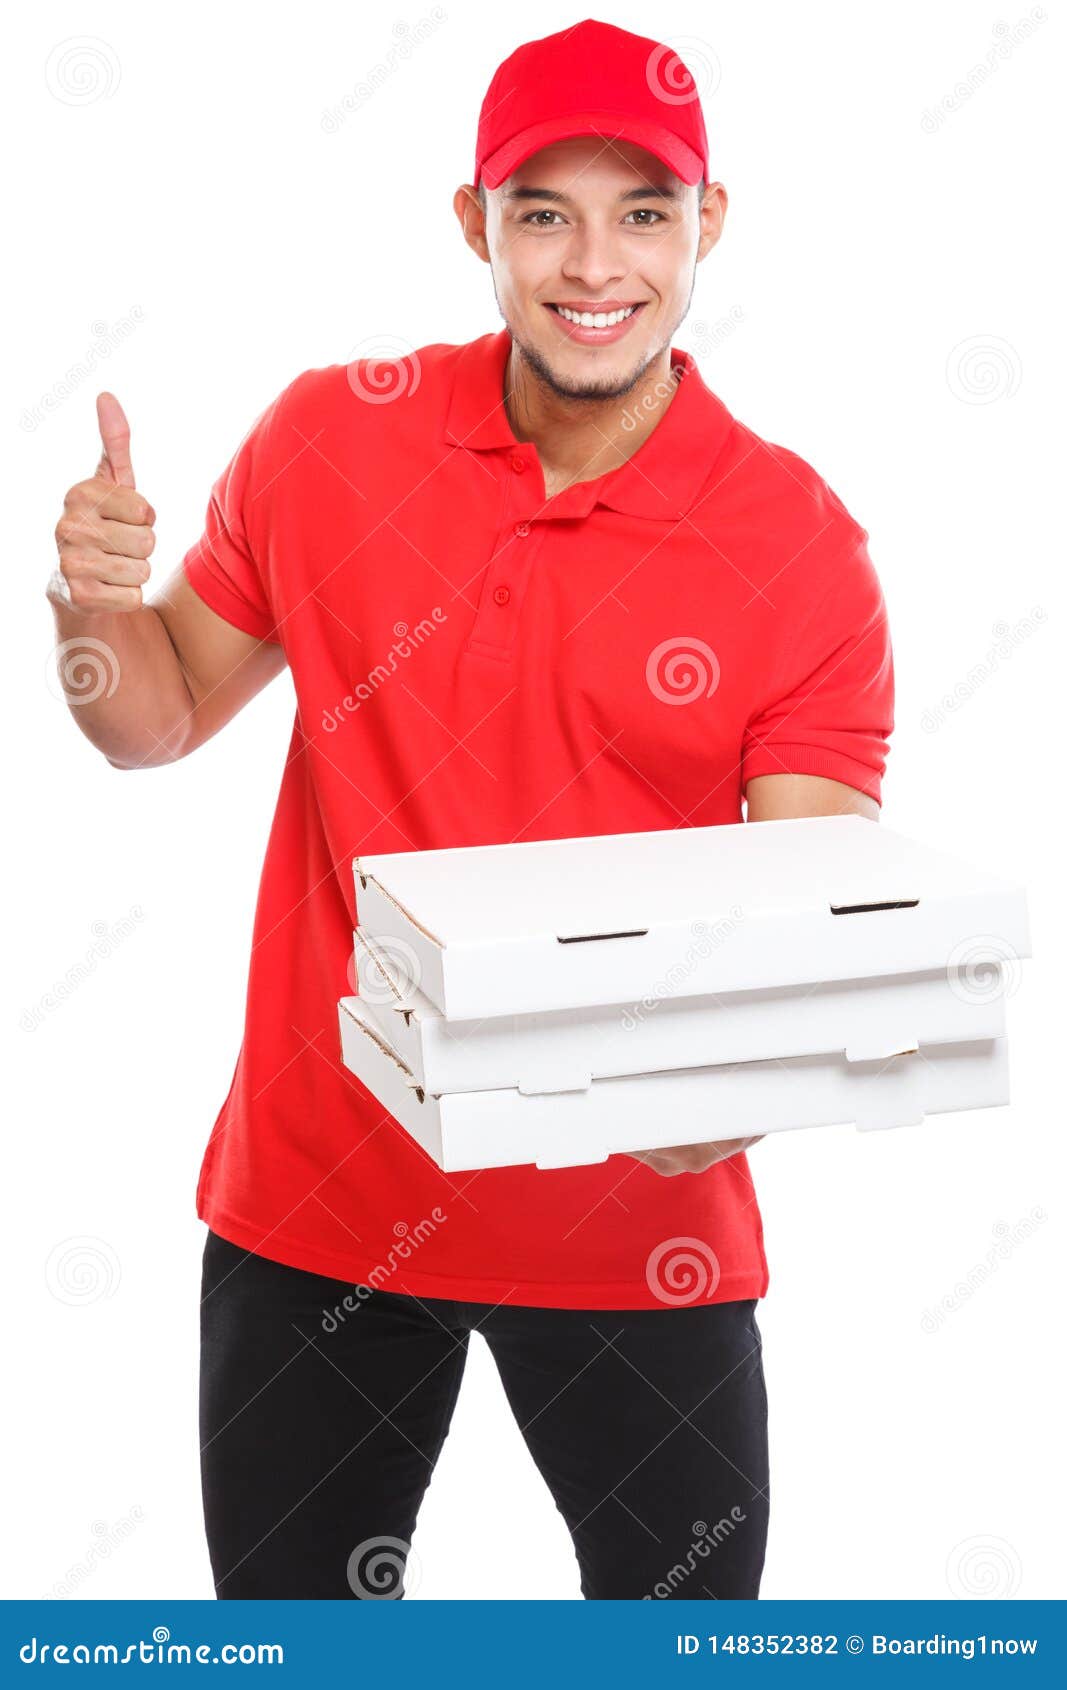 How to get a job delivering pizza